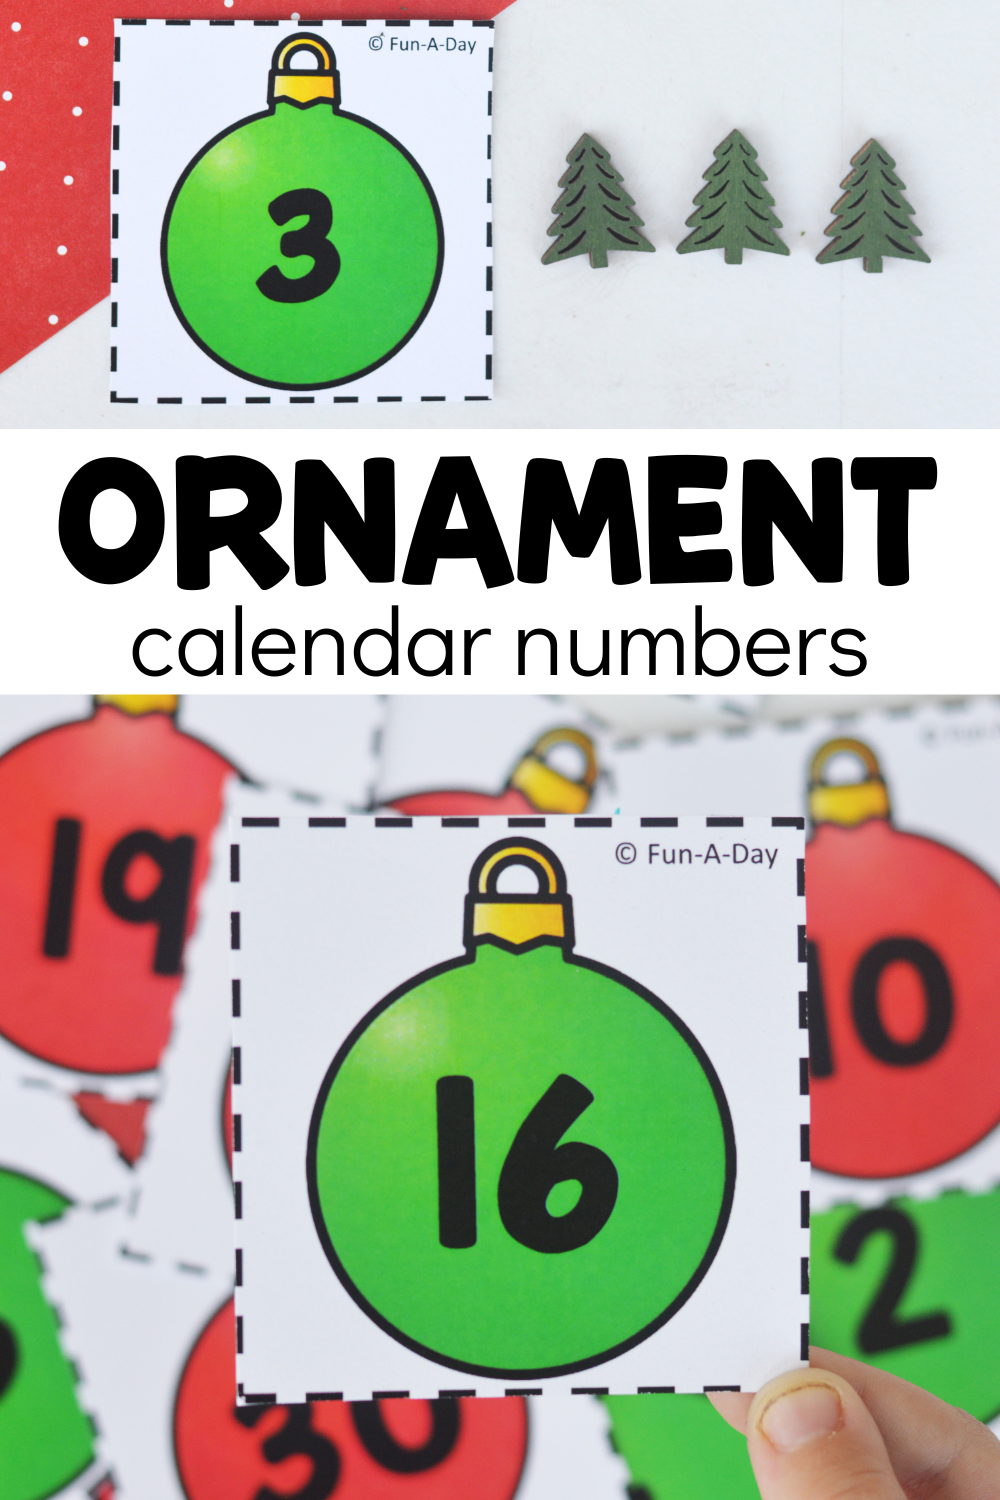 close up of number 16 card and number 3 with trees by it with text that reads ornament calendar numbers